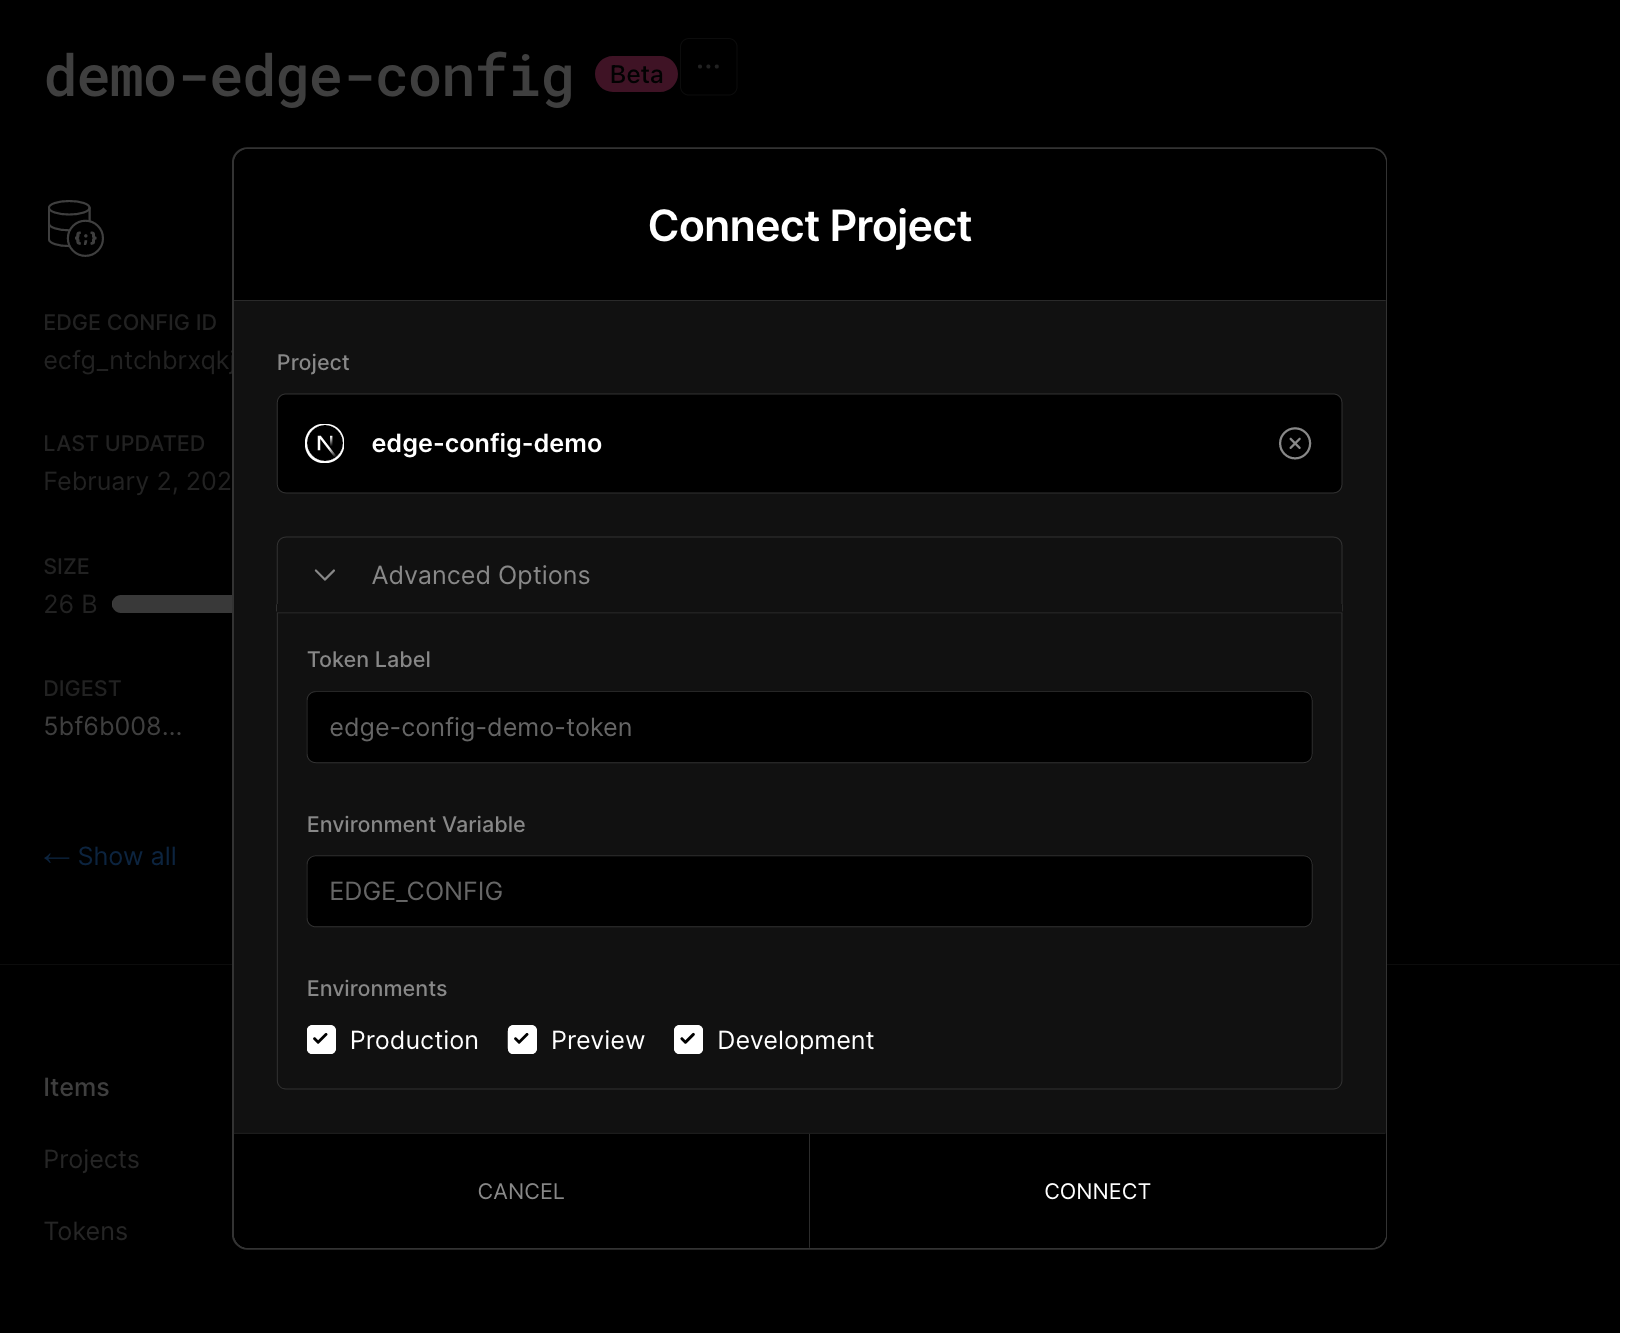 Connecting to Project